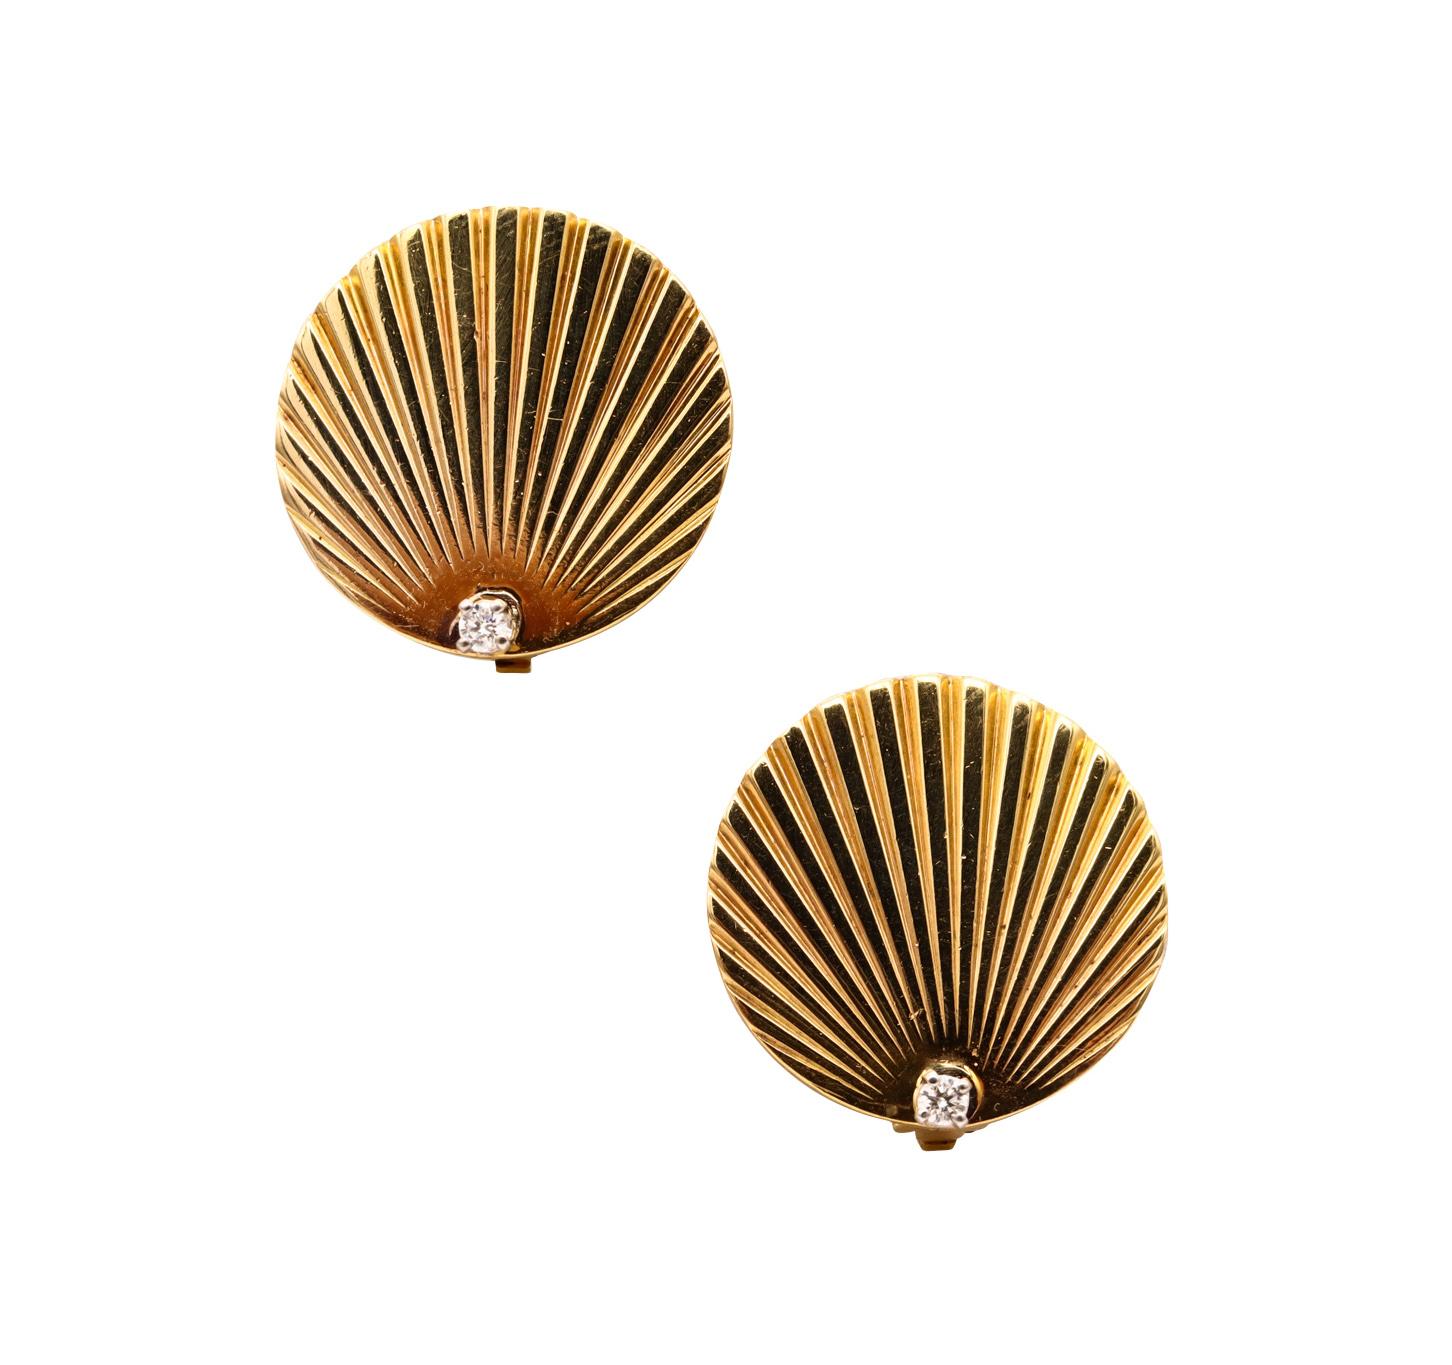 Brilliant Cut Tiffany Co. 1940 by George Schuler Art Deco Earrings with Diamonds in 14Kt Gold 